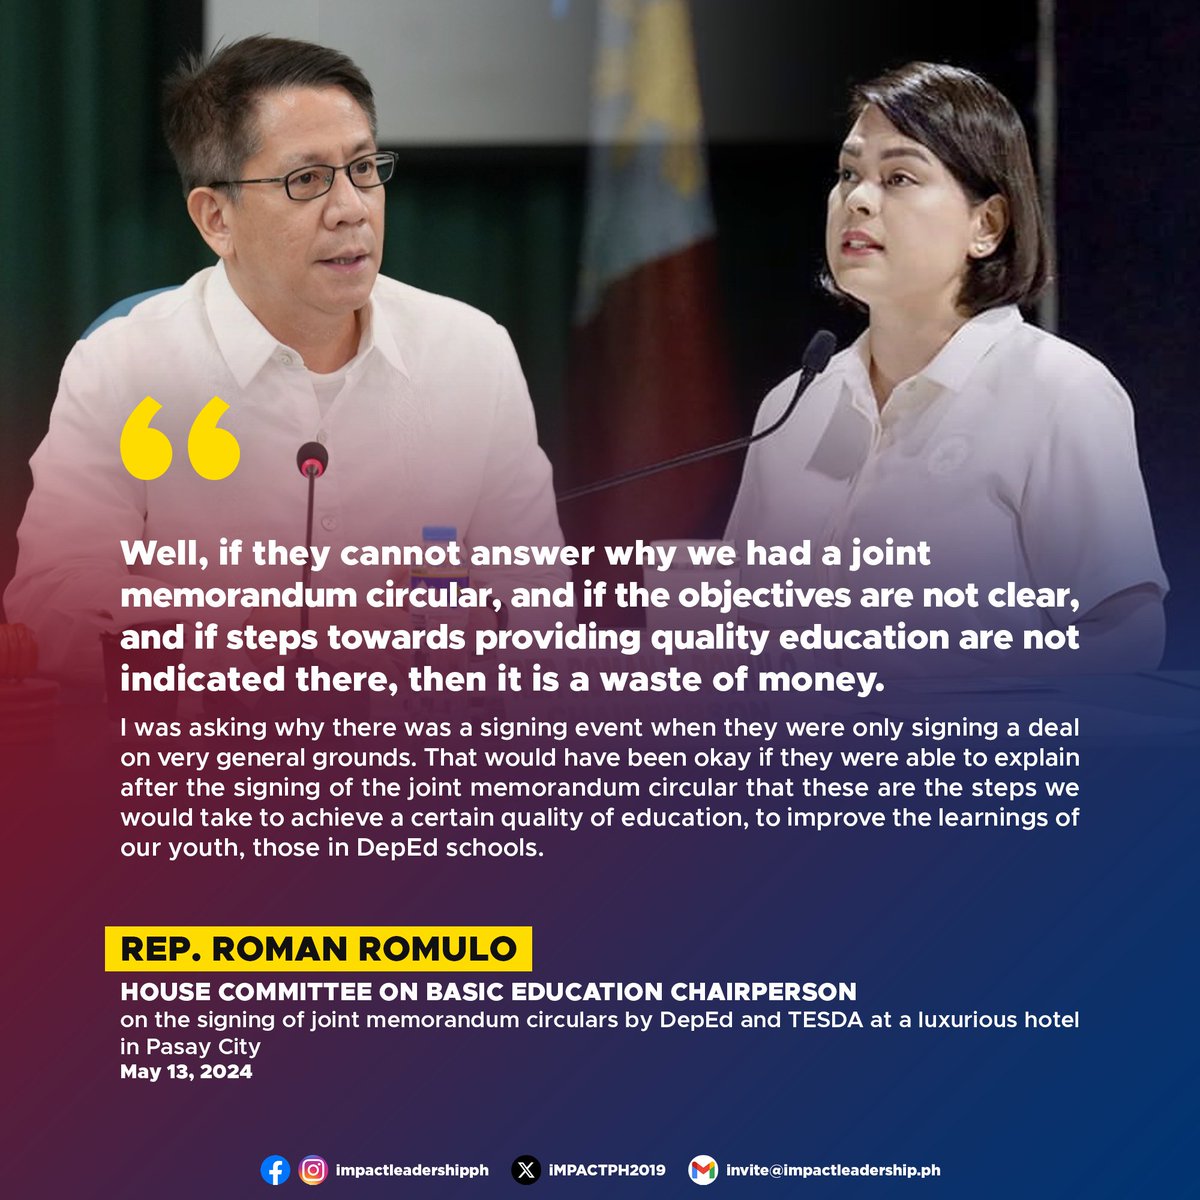 'WASTE OF MONEY'? Pasig Rep. Roman Romulo, Chairperson of the House Committee on Basic Education, said that the signing of the joint memorandum circulars by DepEd and TESDA at the luxurious Hilton Hotel in Pasay City would be a 'waste of money' if the objectives are not clear.